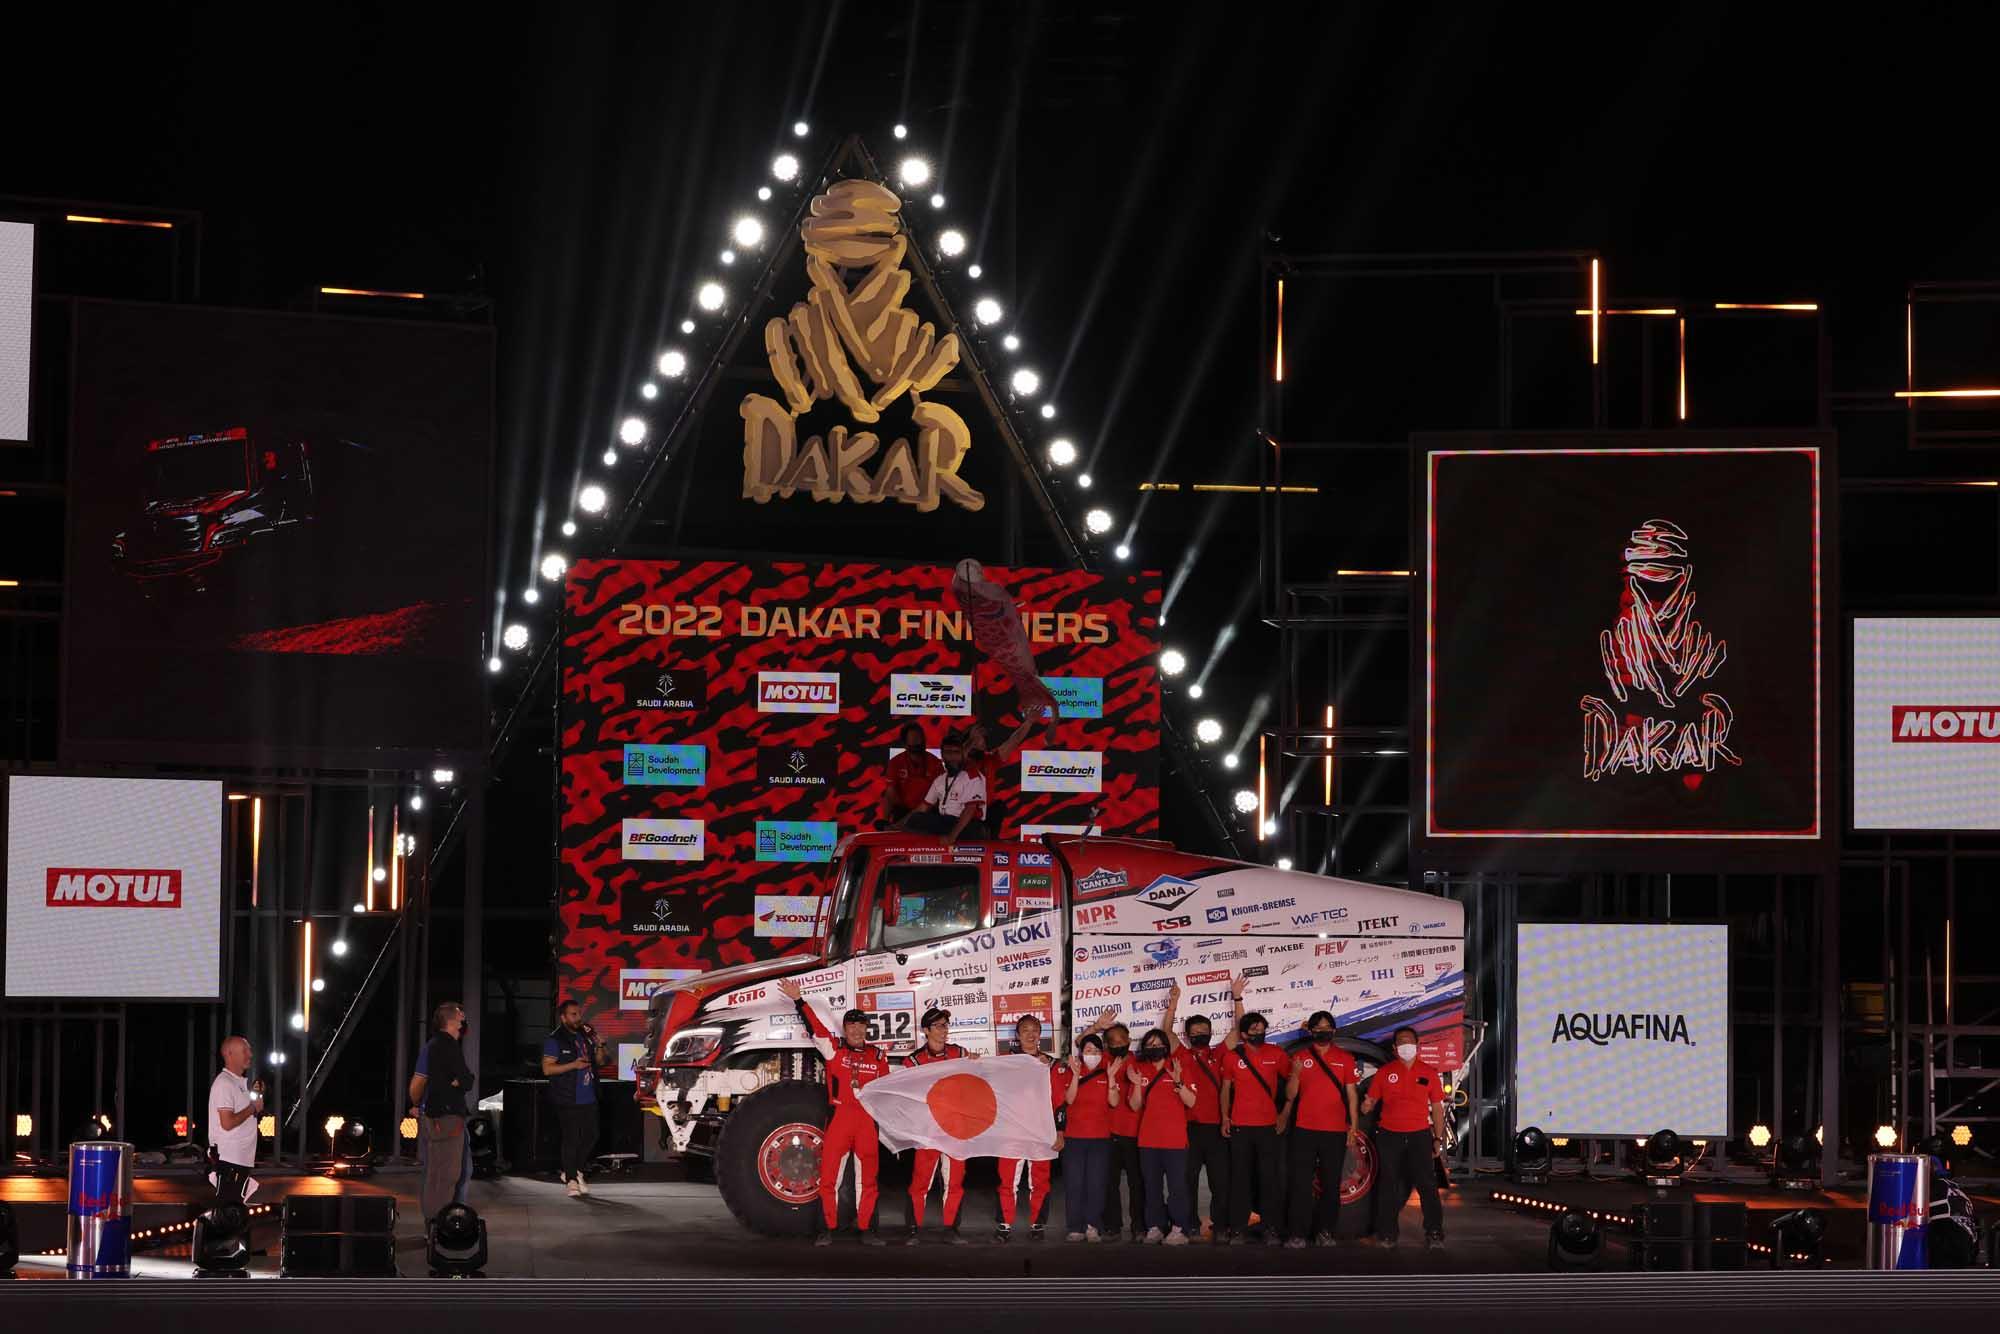 Stage12：First Hybrid-powered HINO 600 Series finishes 22nd overall, Arrives in Jeddah, Dakar 2022 Goal Site